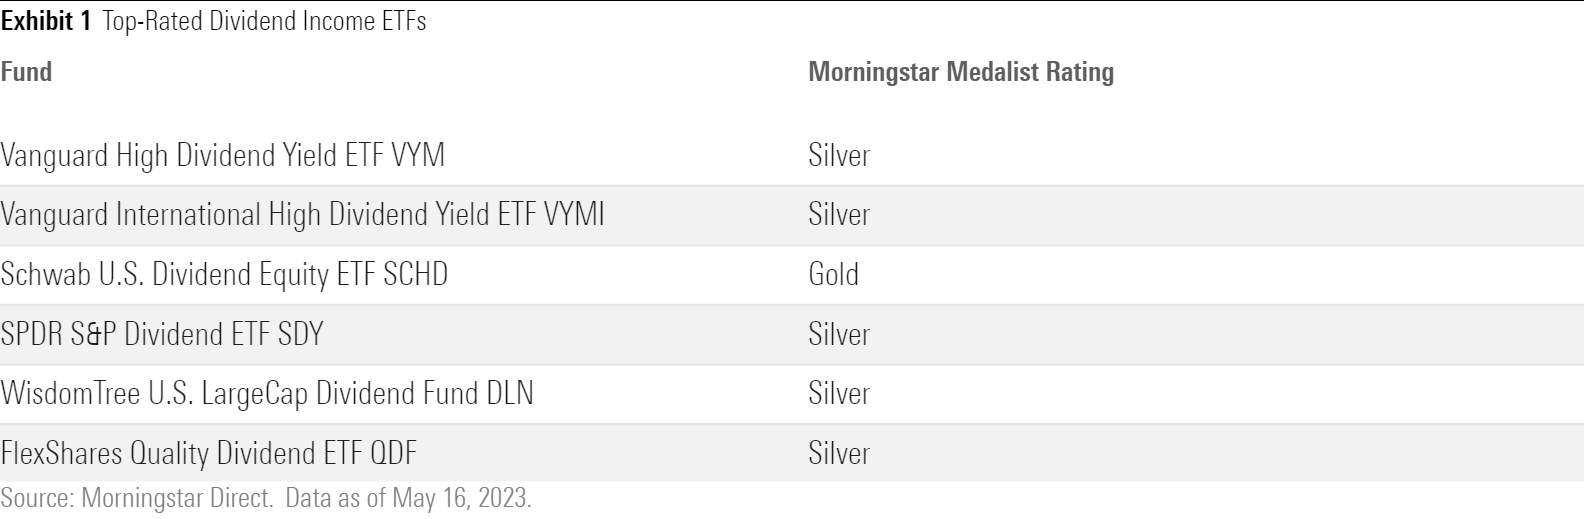 VYM, VYMI, SDY, DLN, and QDF all earn Morningstar Medalists Ratings of Silver, while SCHD earns a Gold rating.